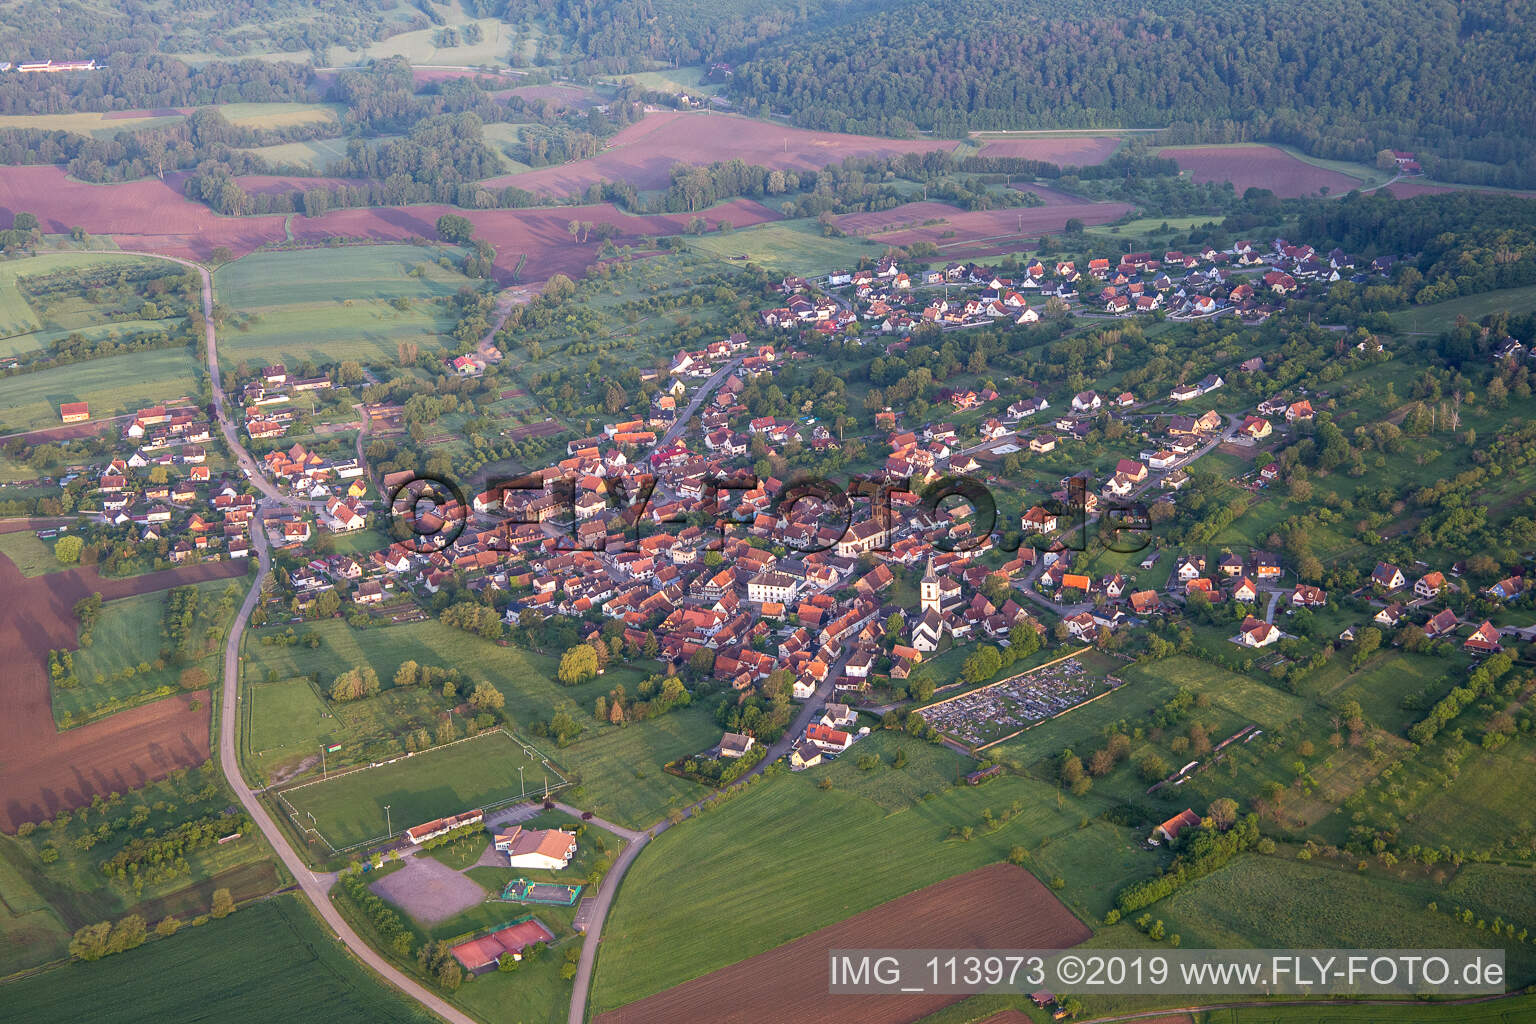 Gœrsdorf in the state Bas-Rhin, France seen from above